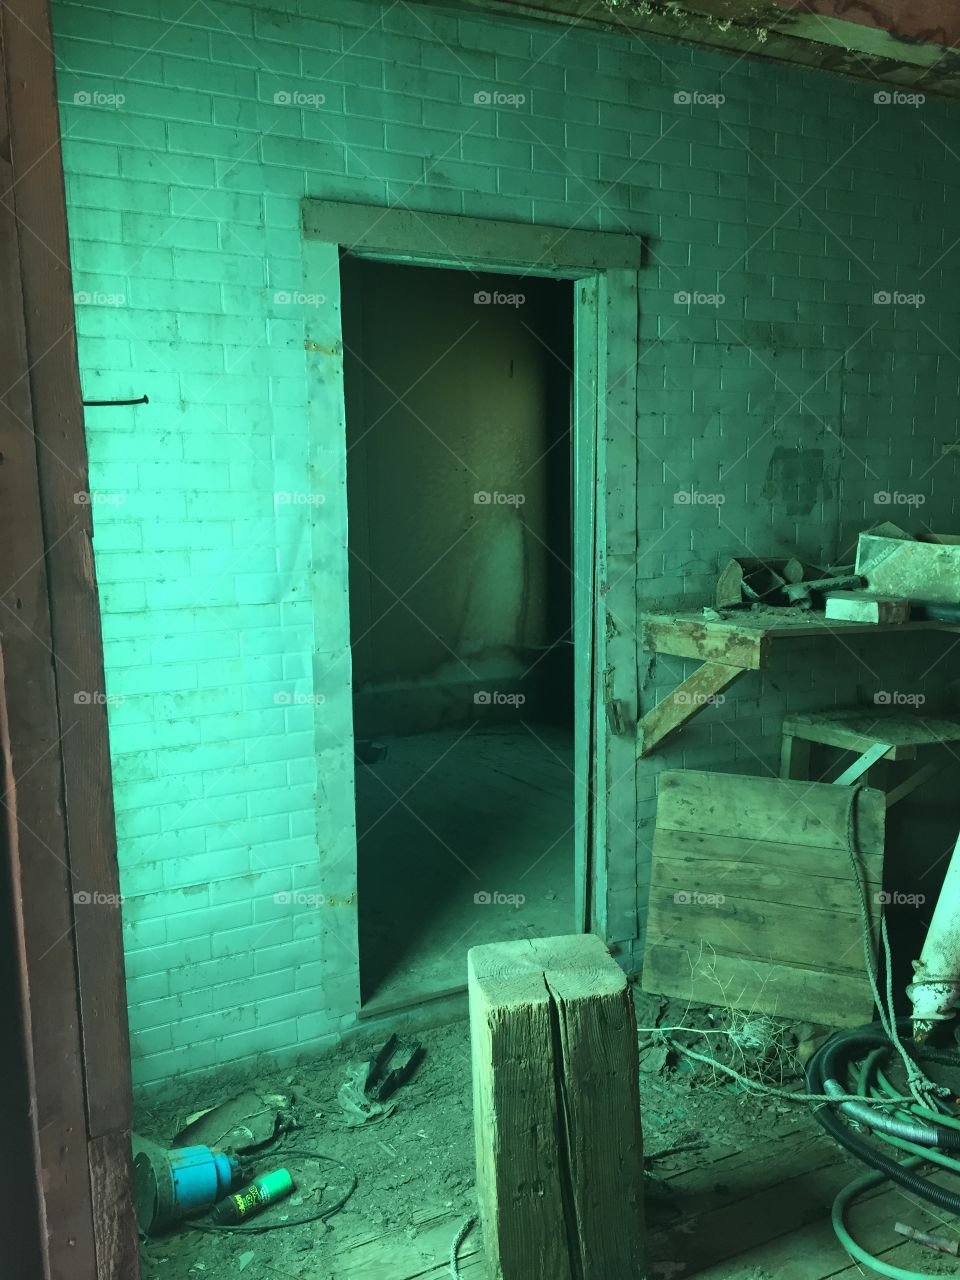 No Person, Abandoned, Indoors, Room, Light